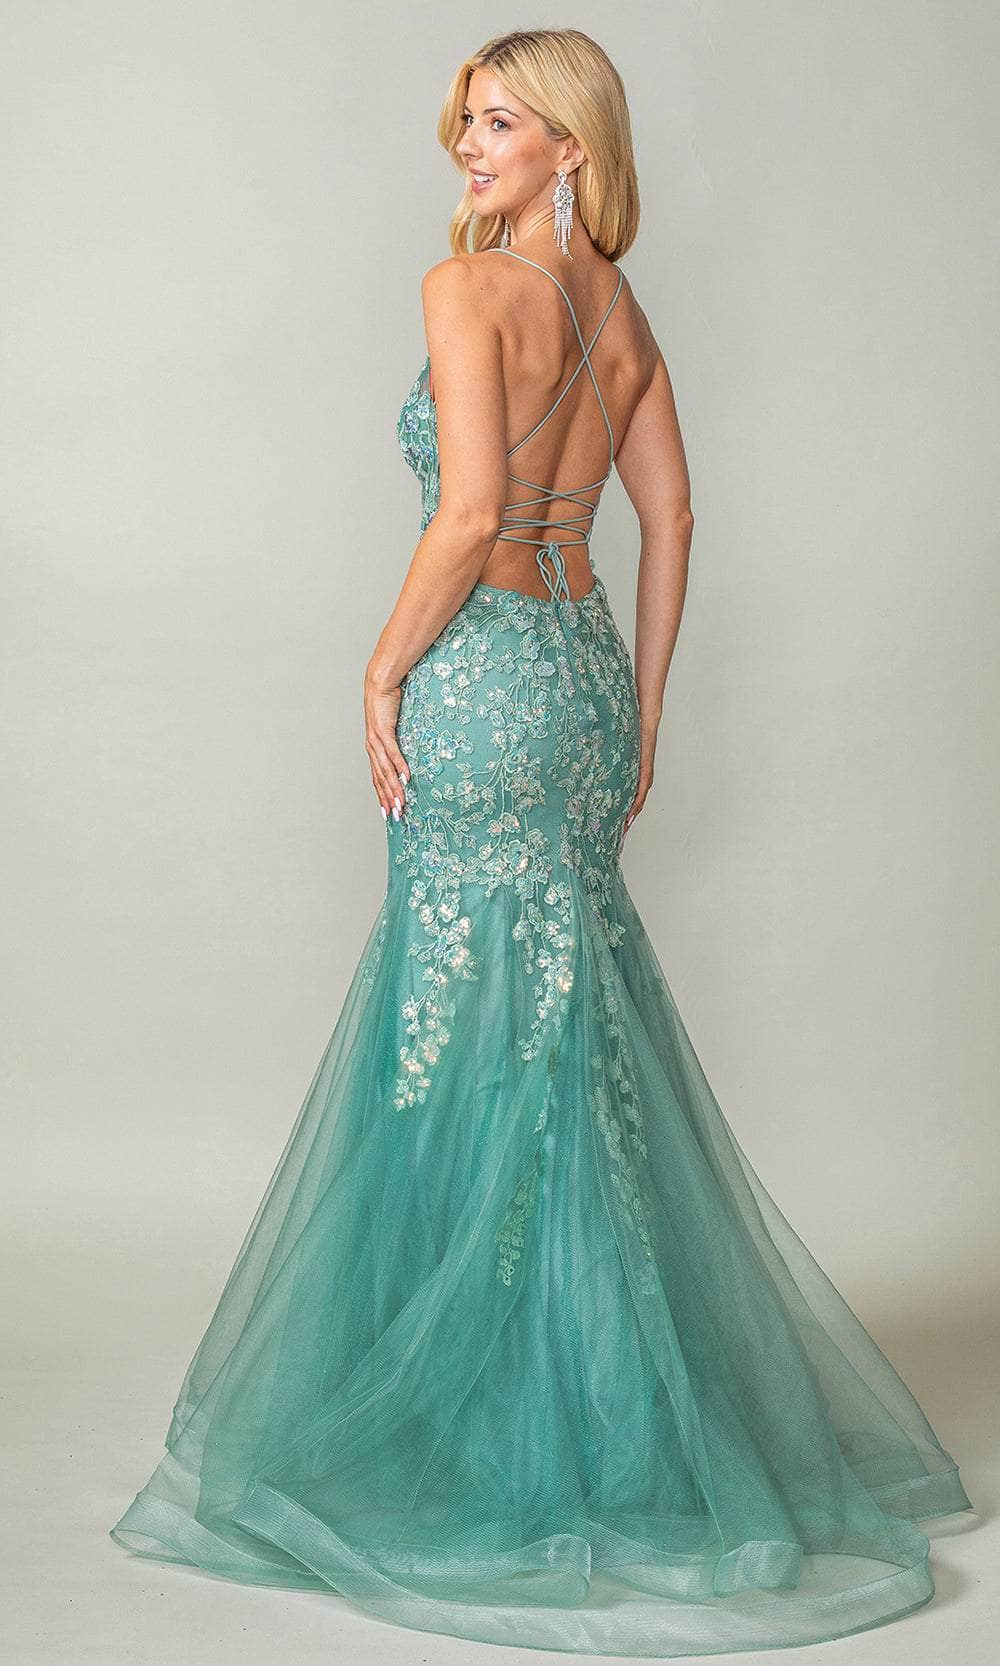 Dancing Queen 4353 - Lace Up Applique Prom Dress Prom Dresses